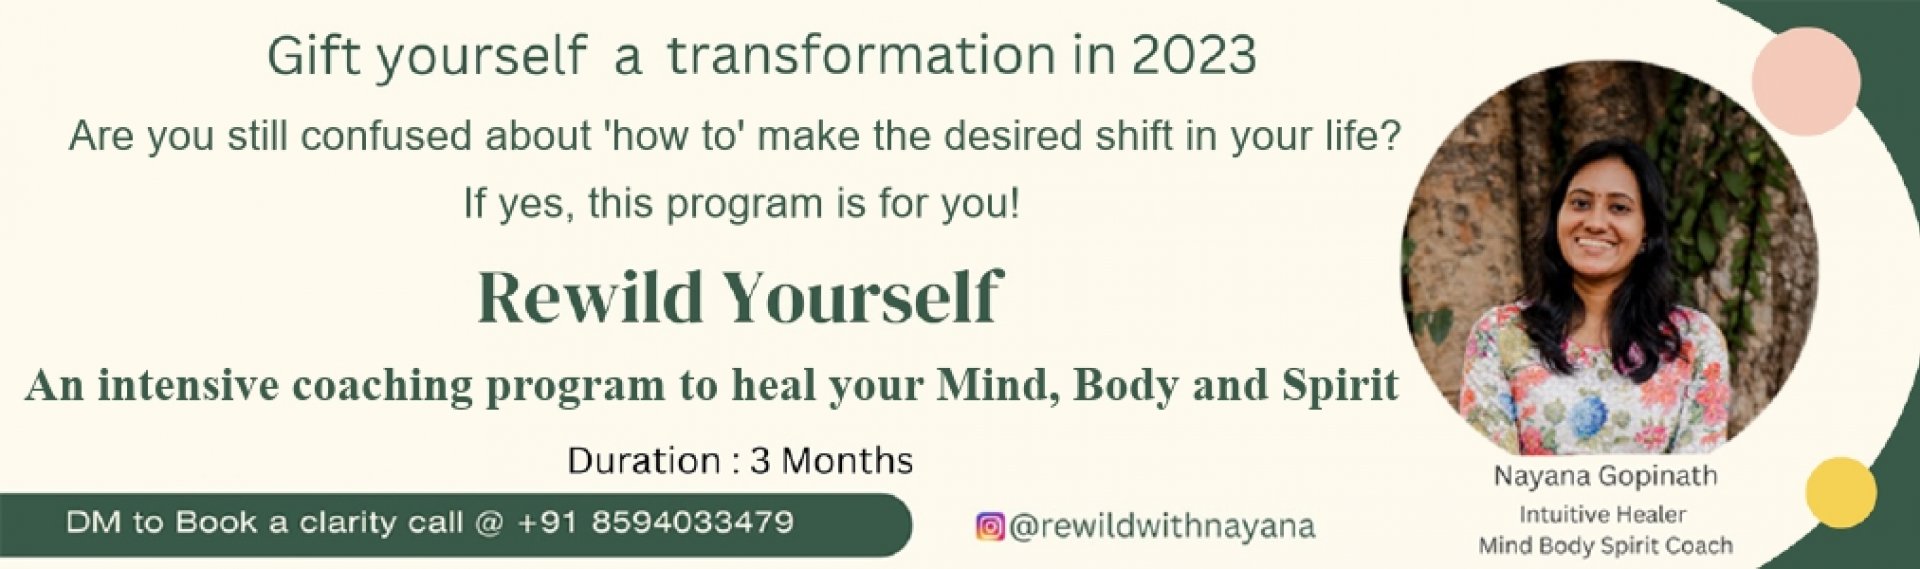 Gift yourself a transformation 2023